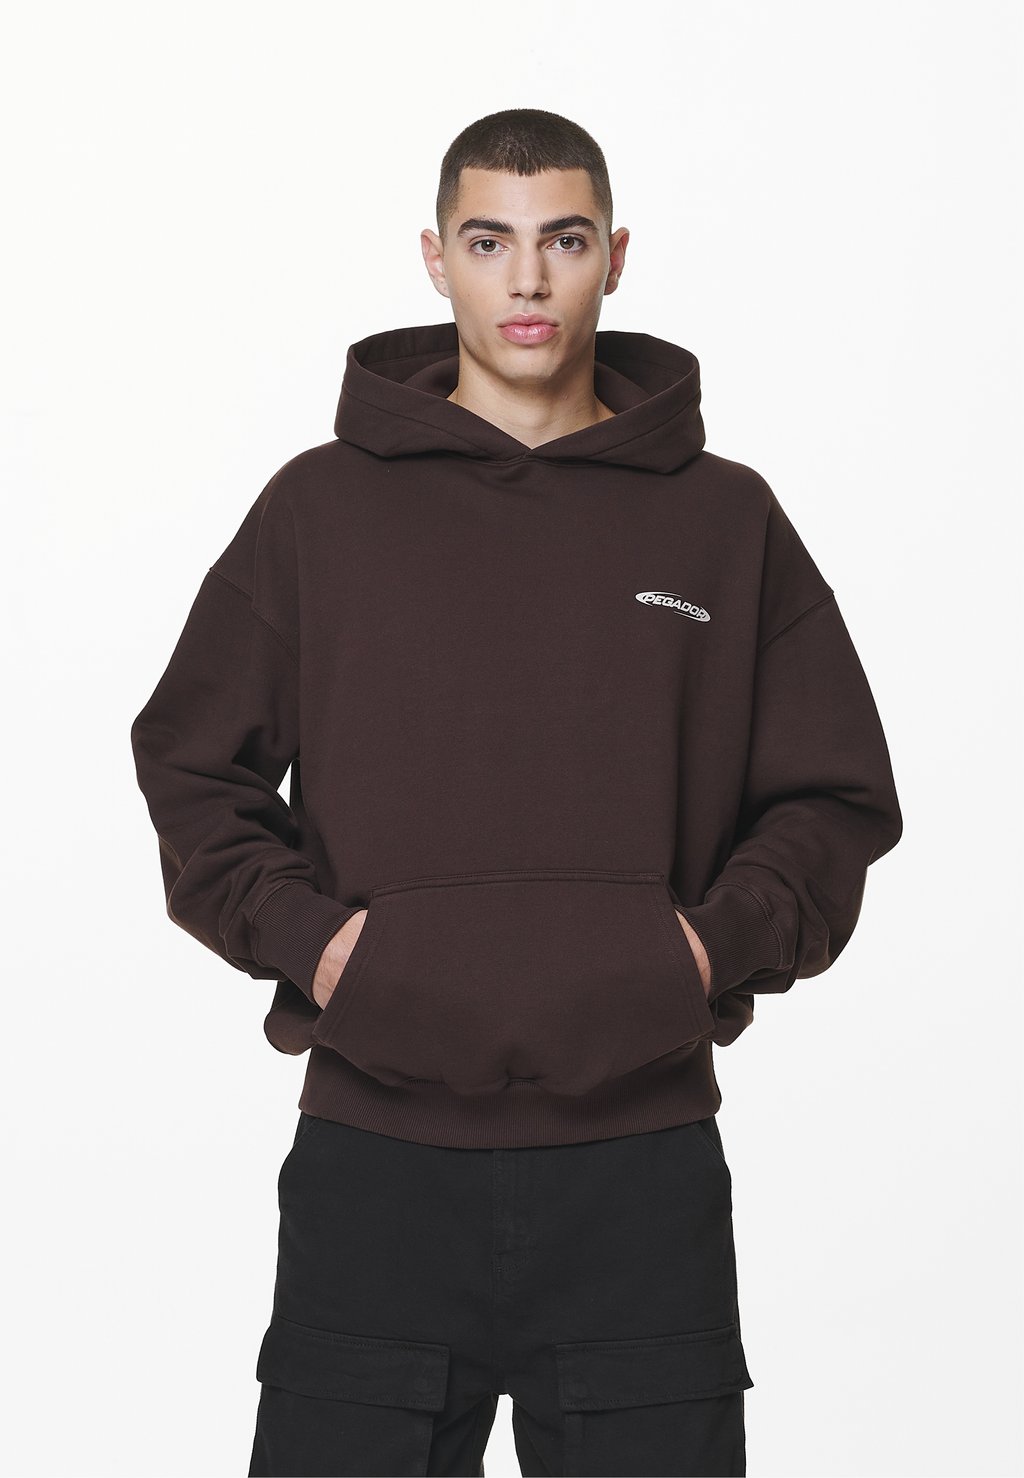 Худи Crail Oversized Hoodie Pegador, цвет washed oak brown